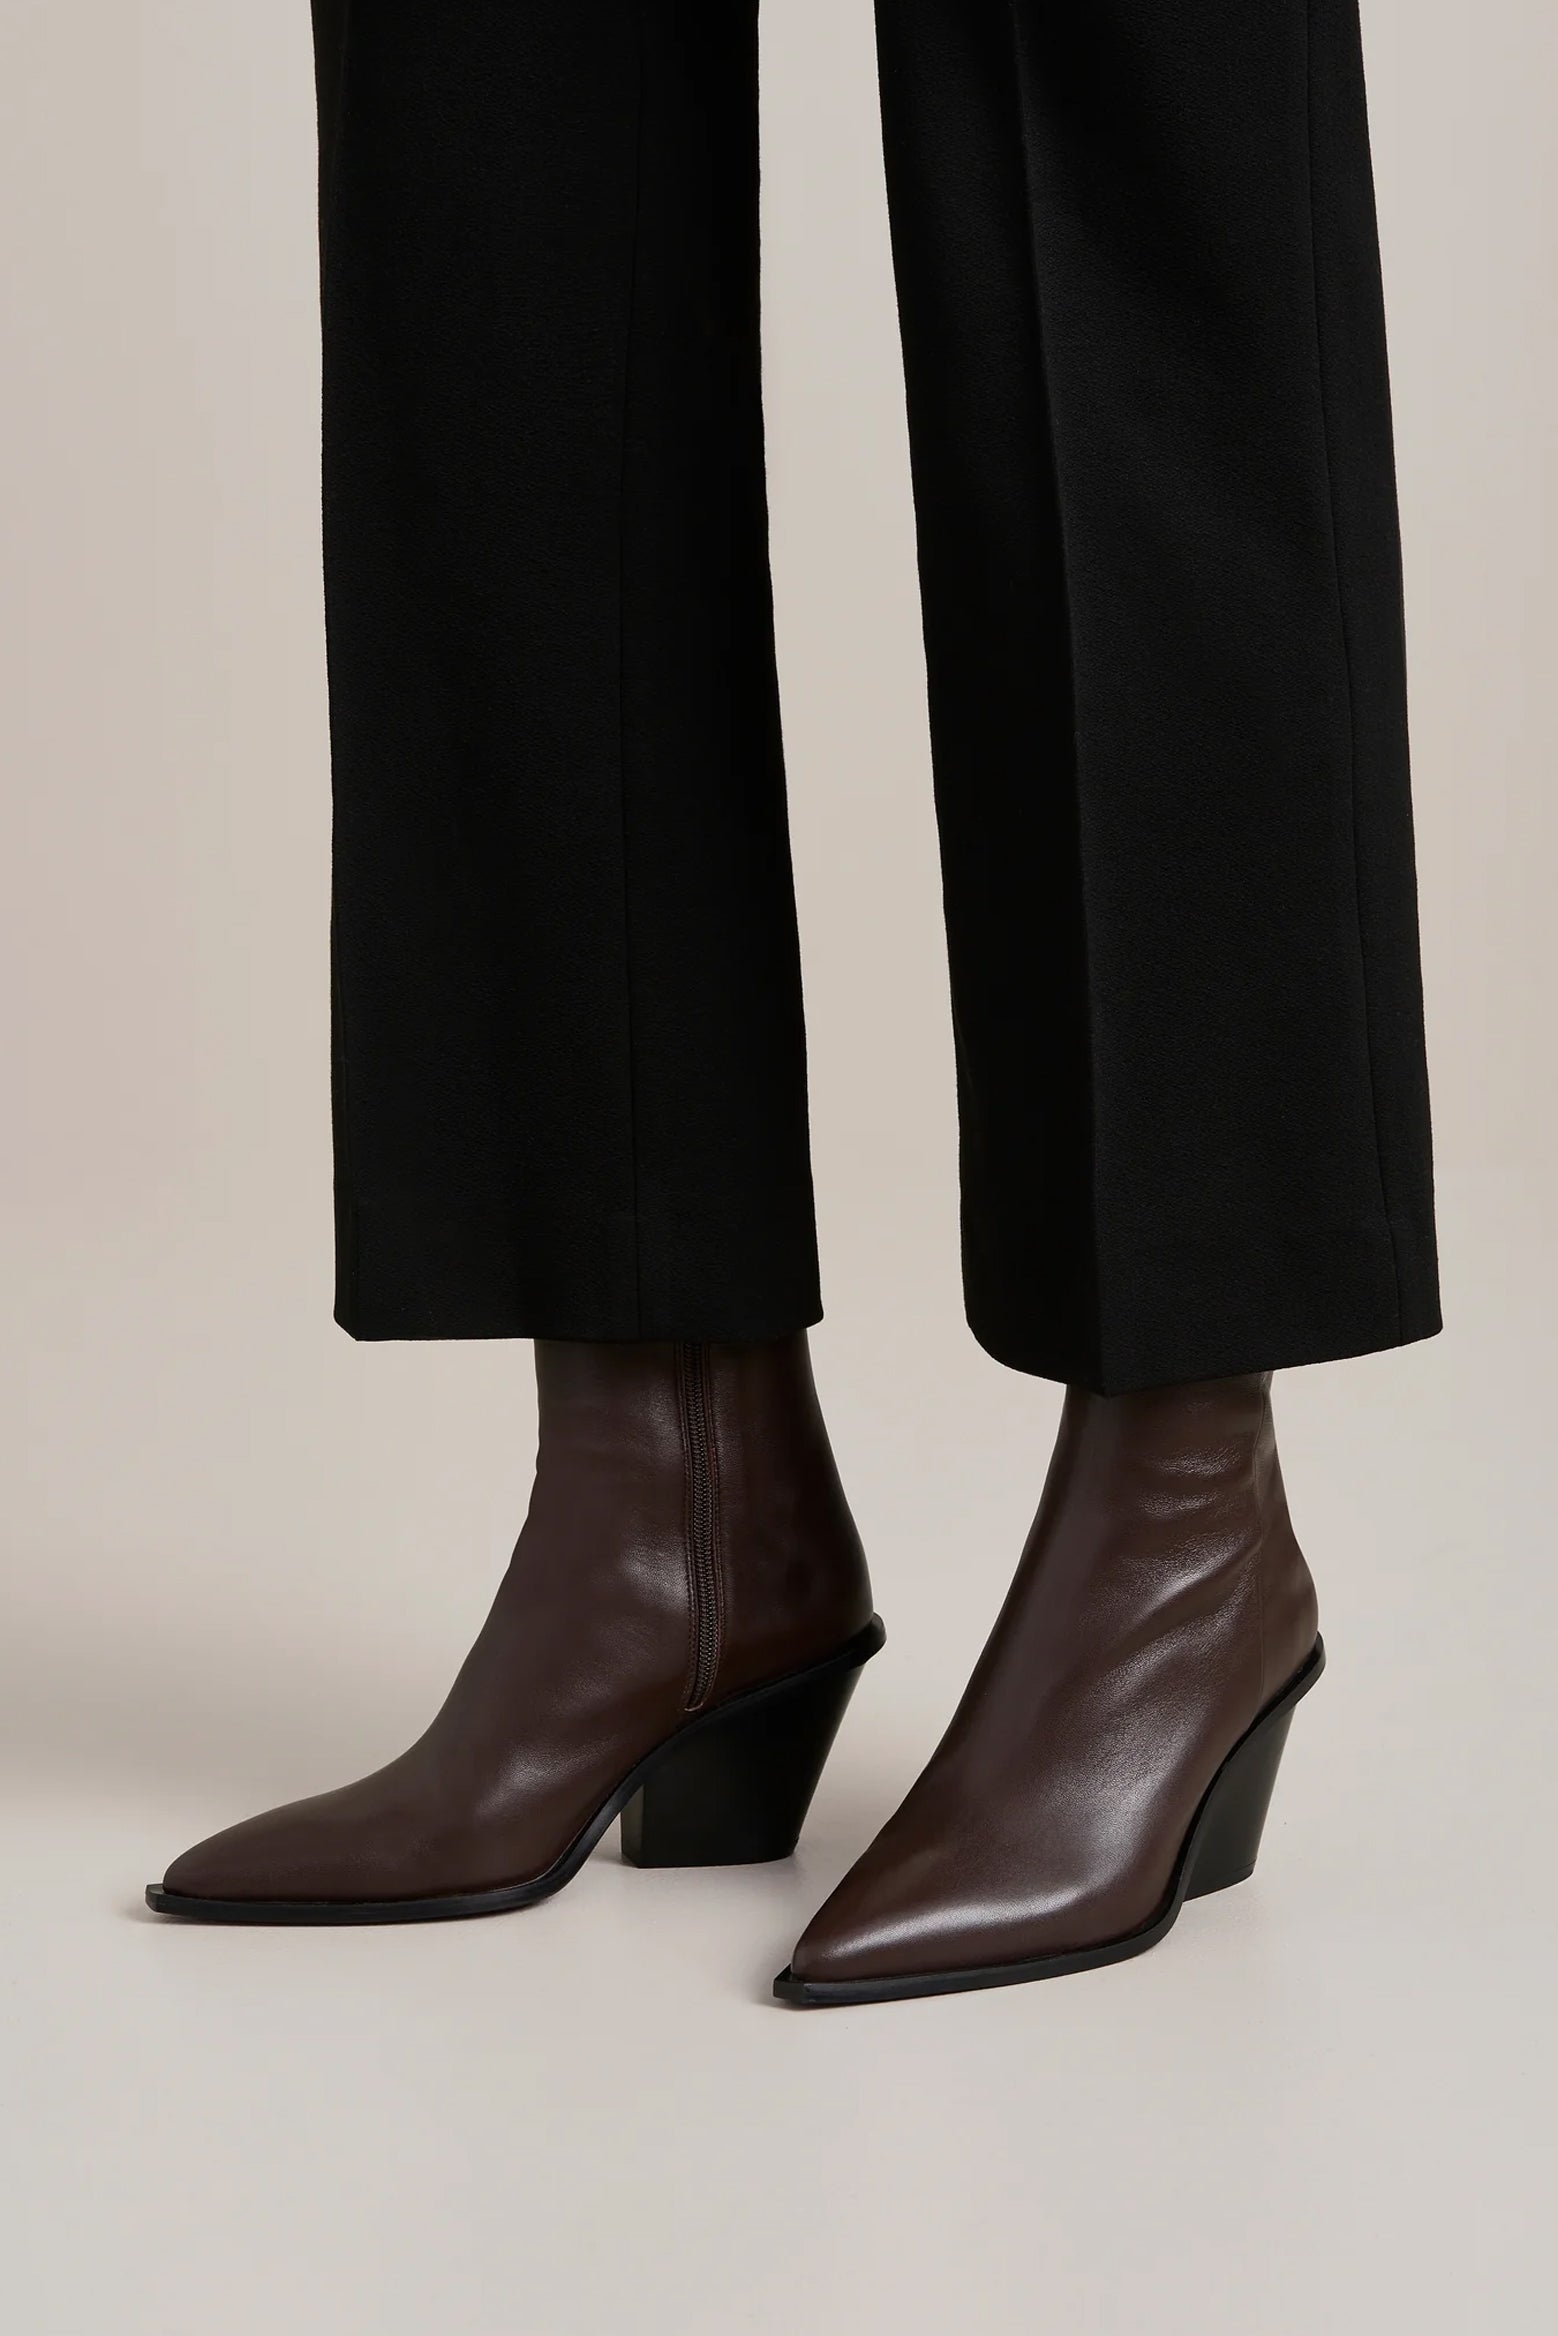 A.Emery Odin Boot in Walnut available at The New Trend Australia.